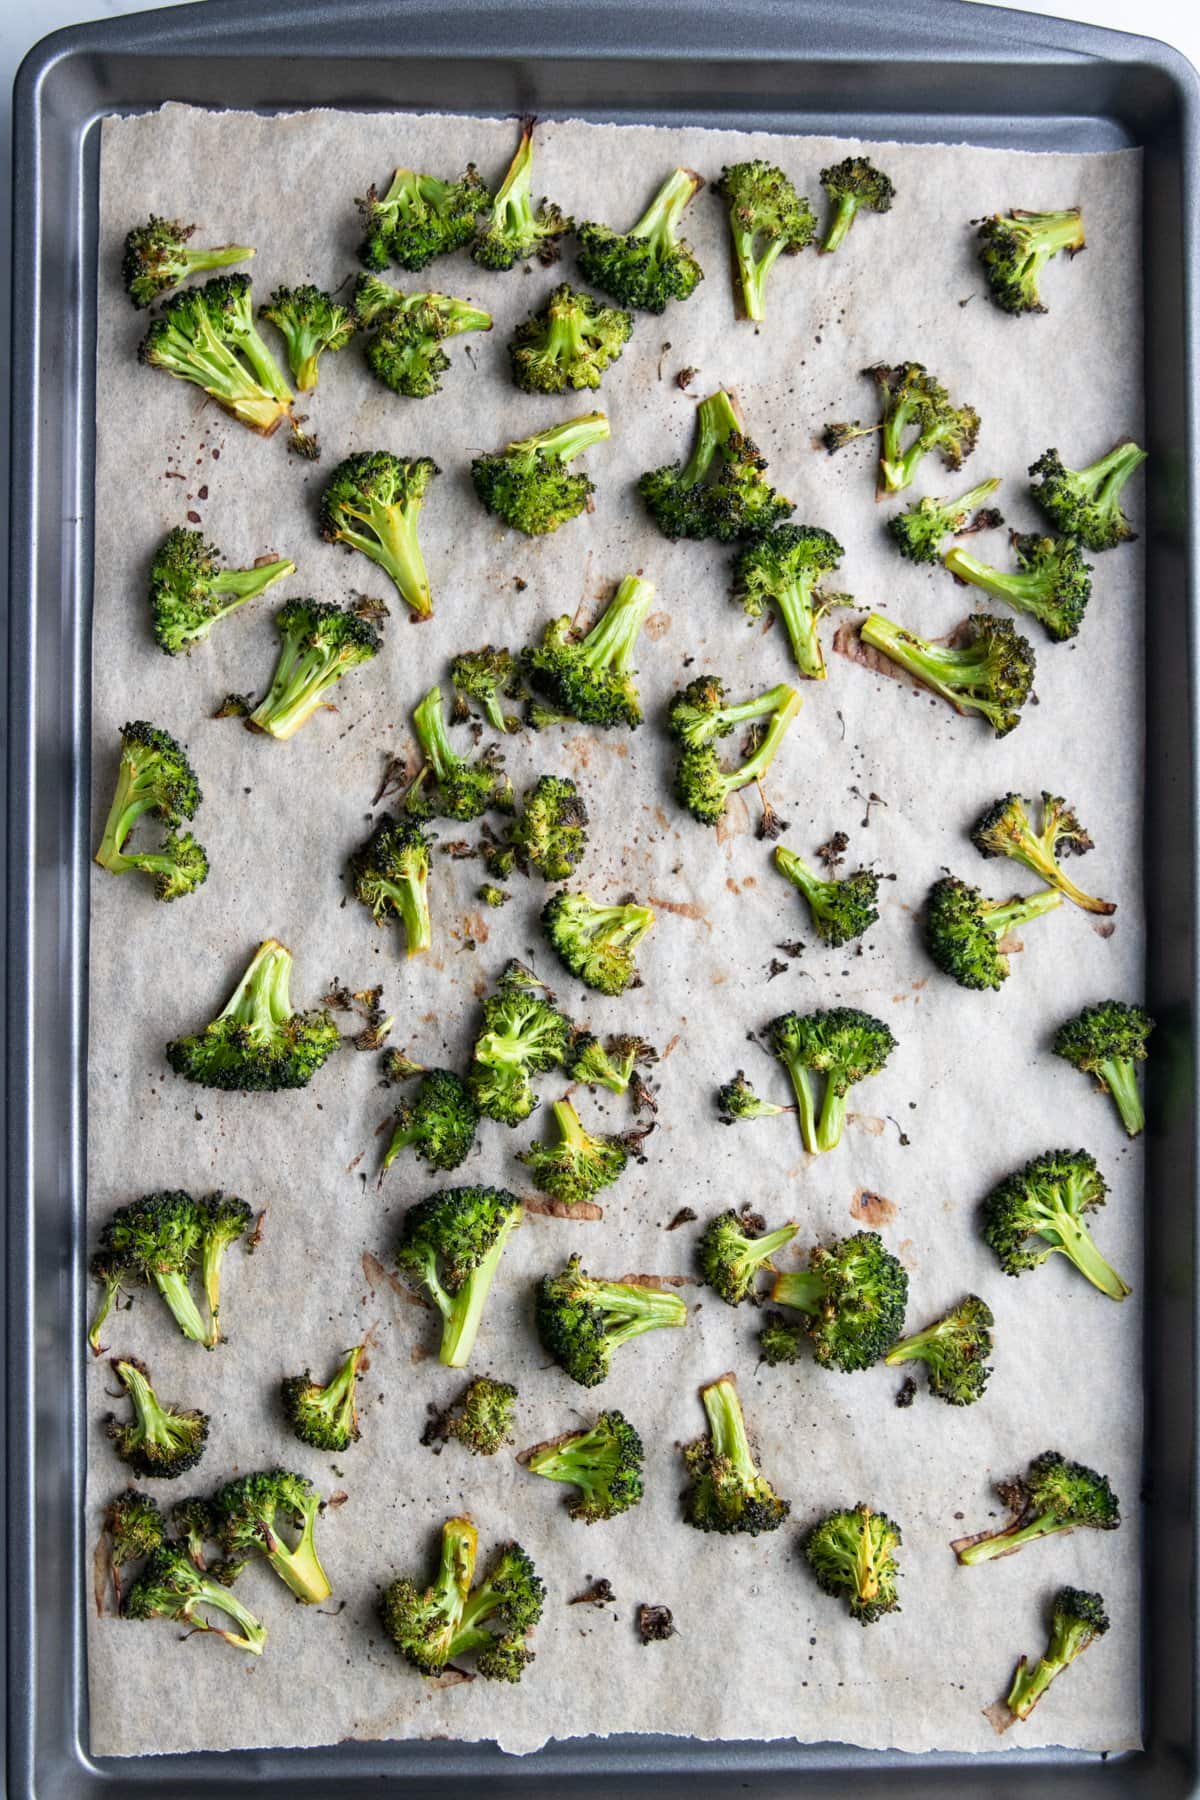 A baking sheet with roasted broccoli florets.